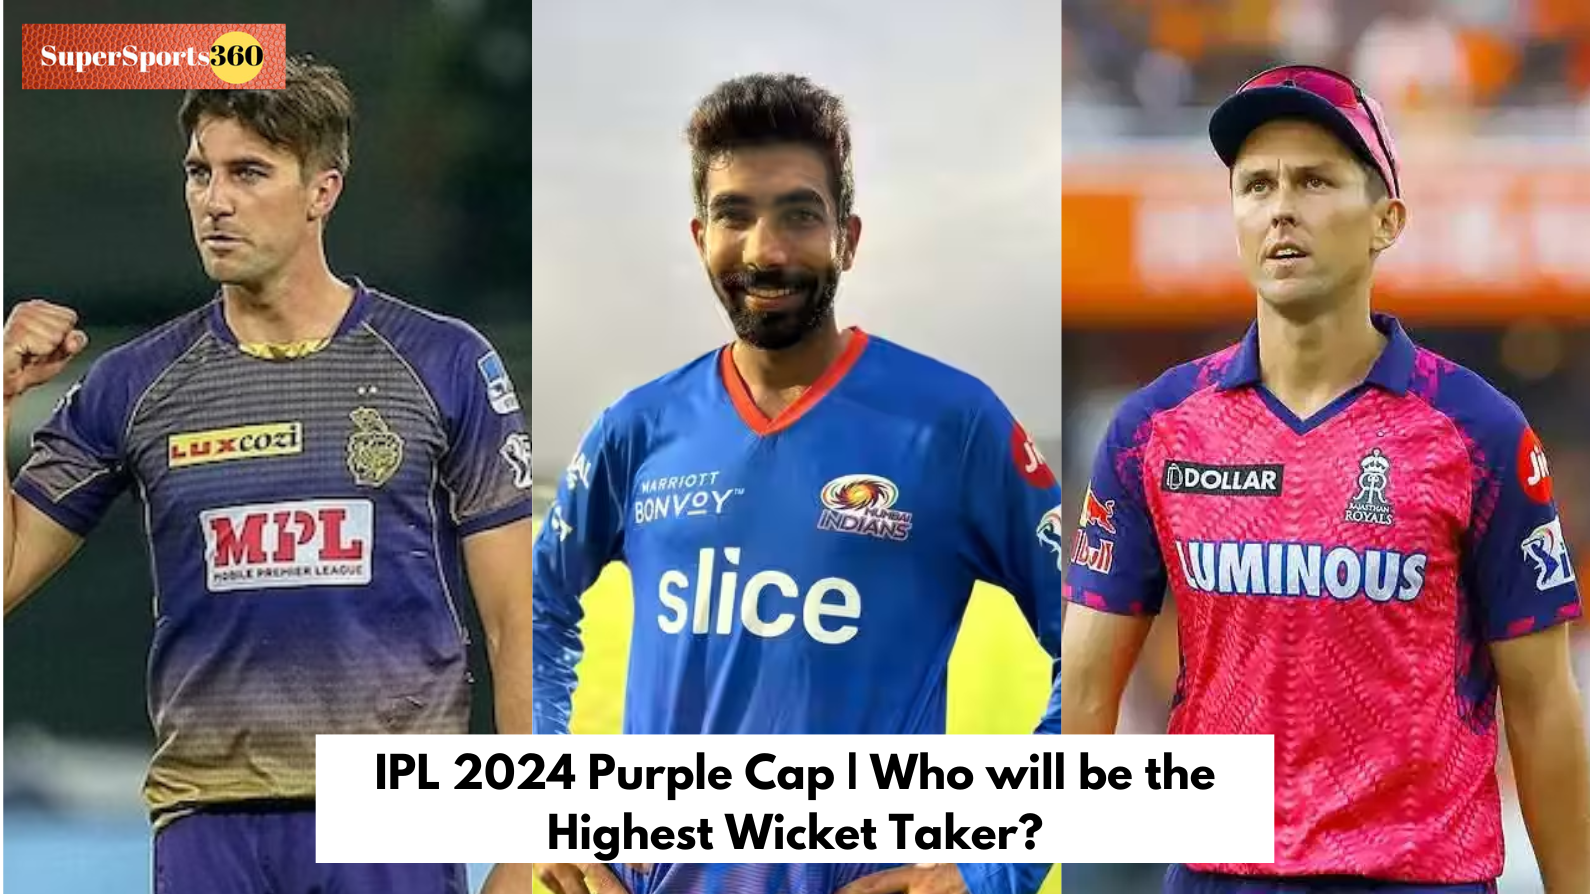 IPL 2024 Purple Cap | Who will be the Highest Wicket Taker?